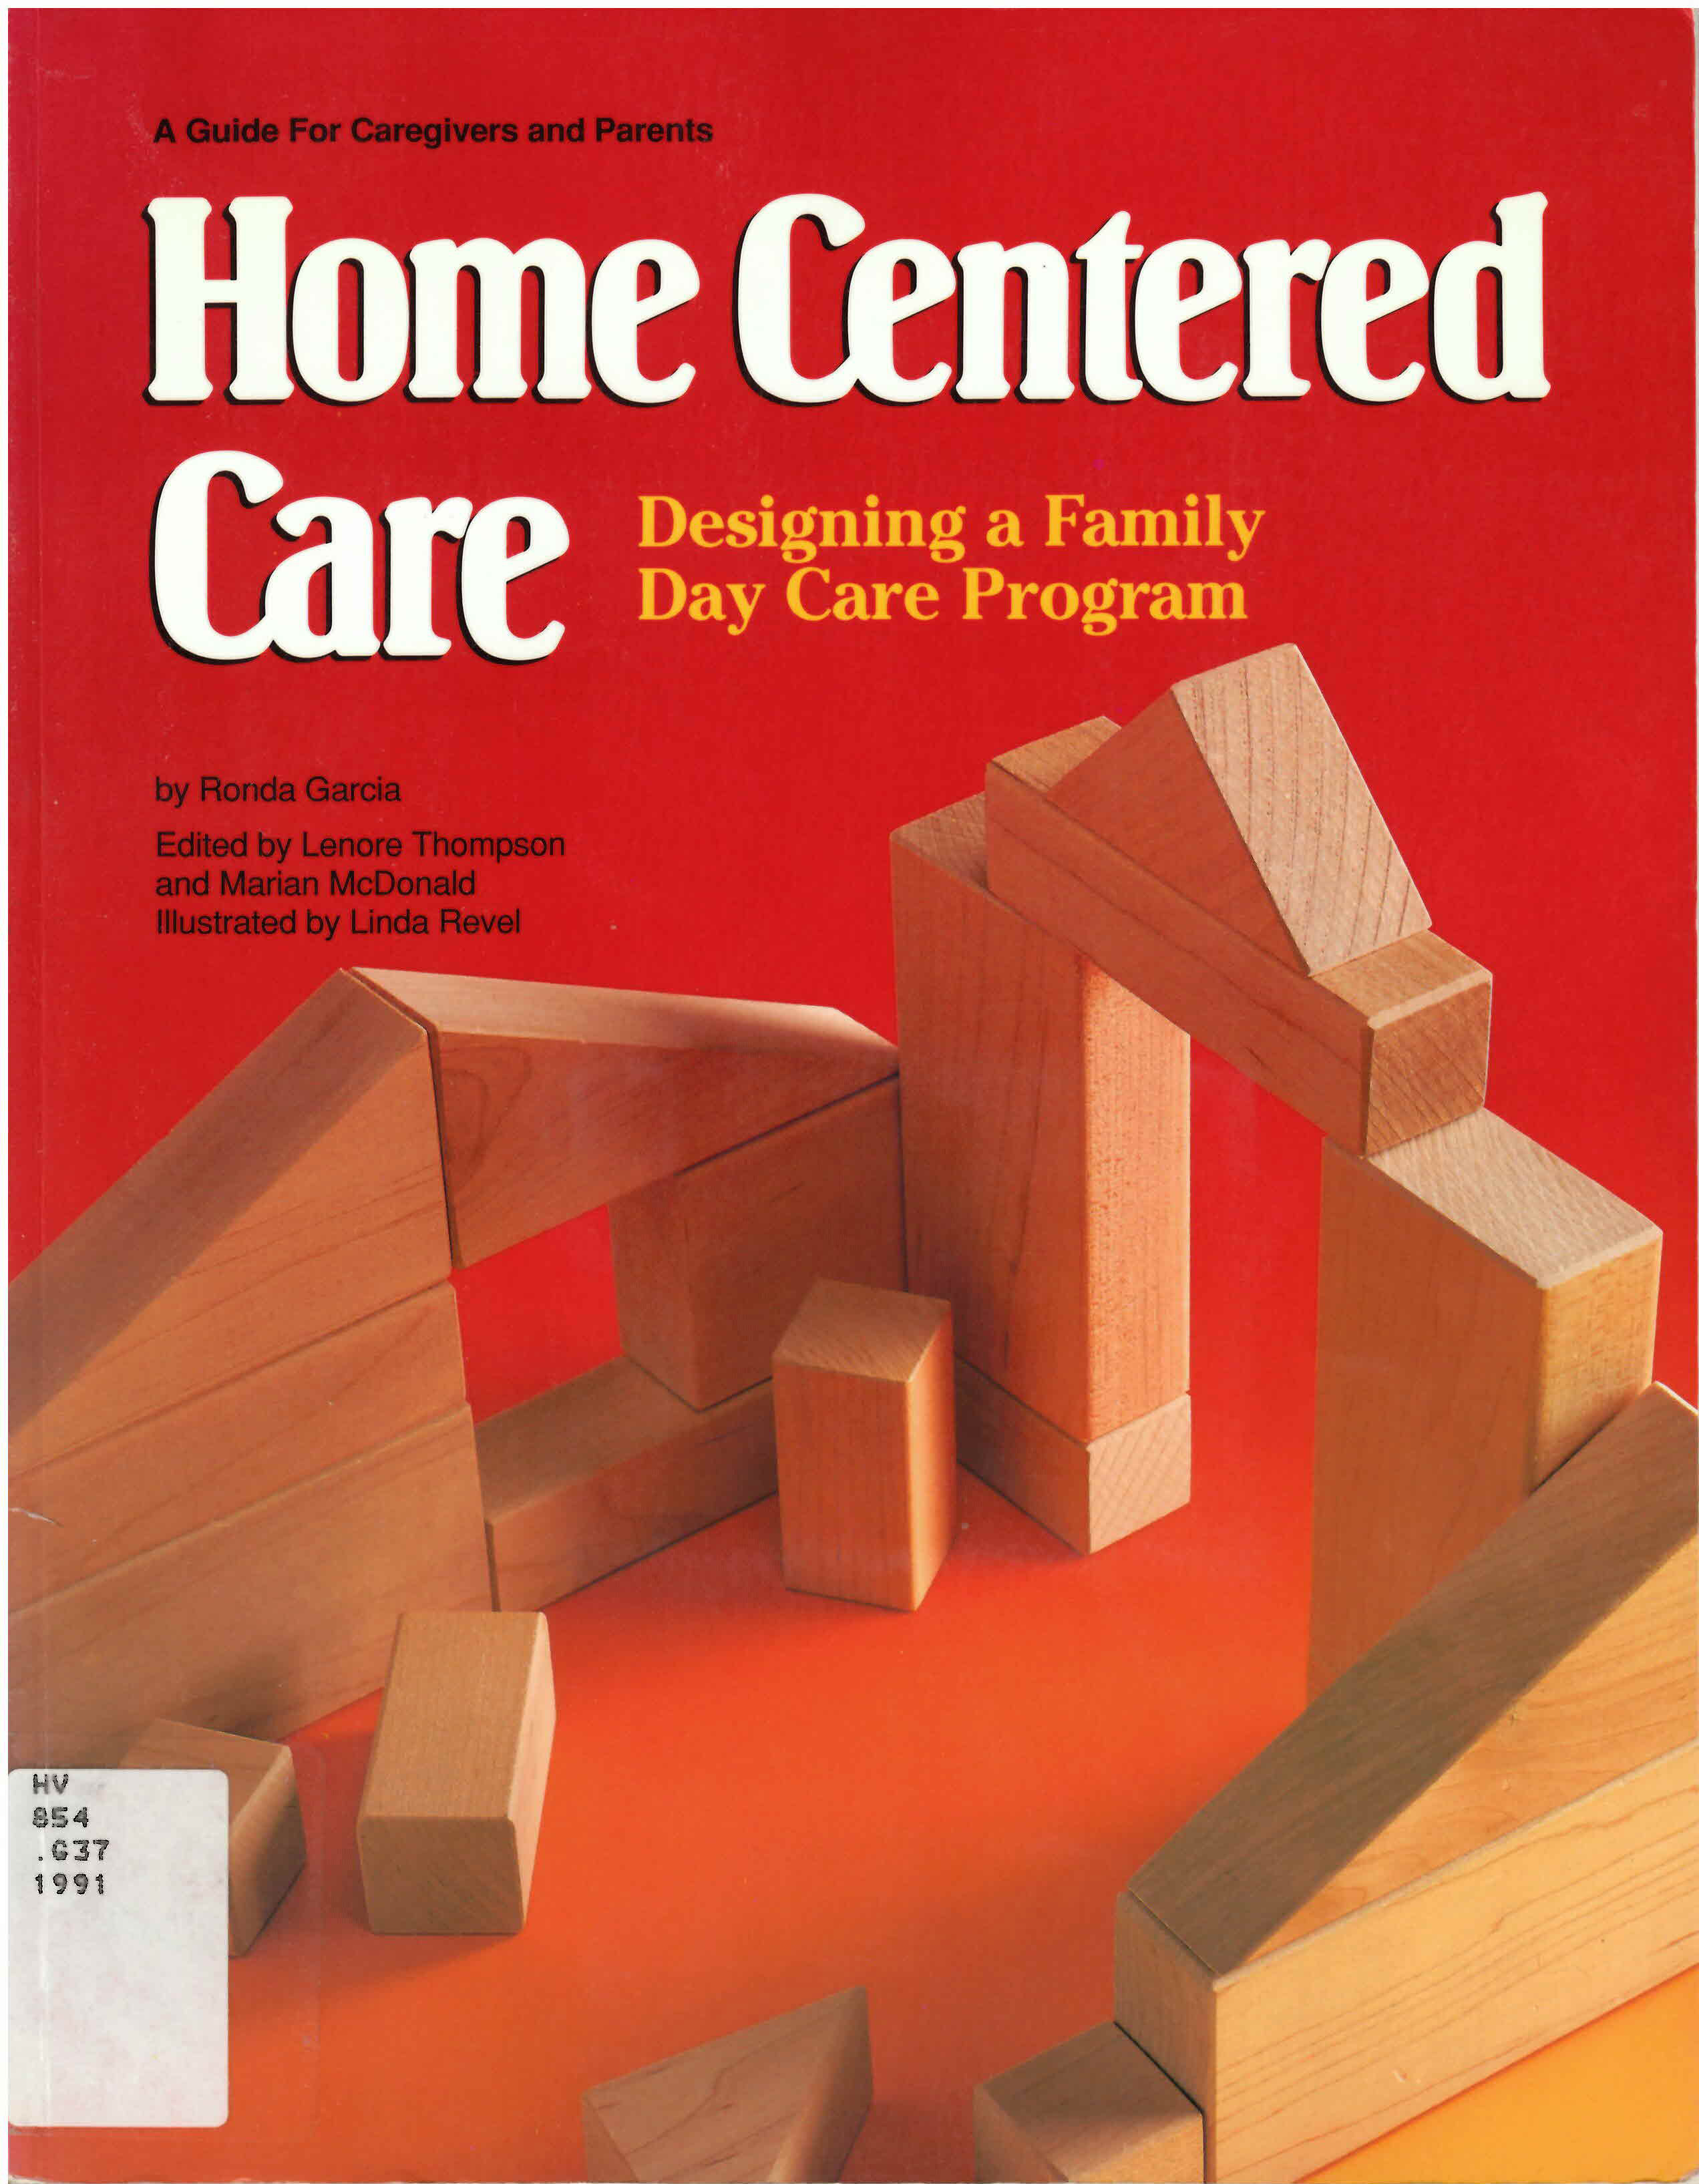 Home centered care: : designing a family day care program  : a guide for caregivers and parents /